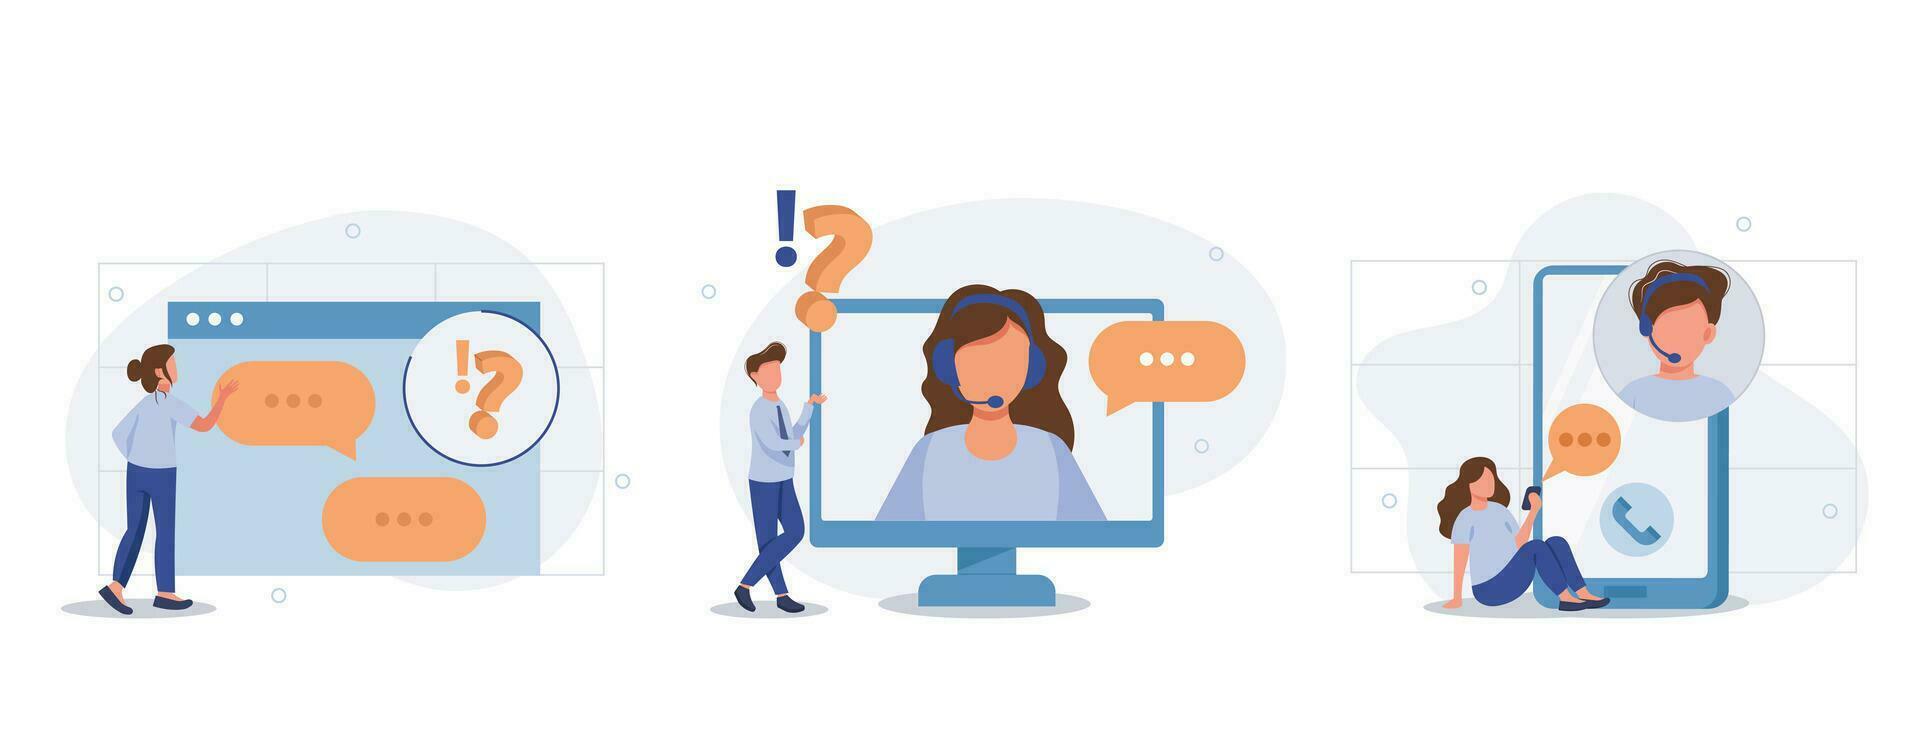 Customer support illustration collection. Characters using online helpdesk platform. People asking a questions and receiving answers from helpdesk or call center operator. Vector illustration.